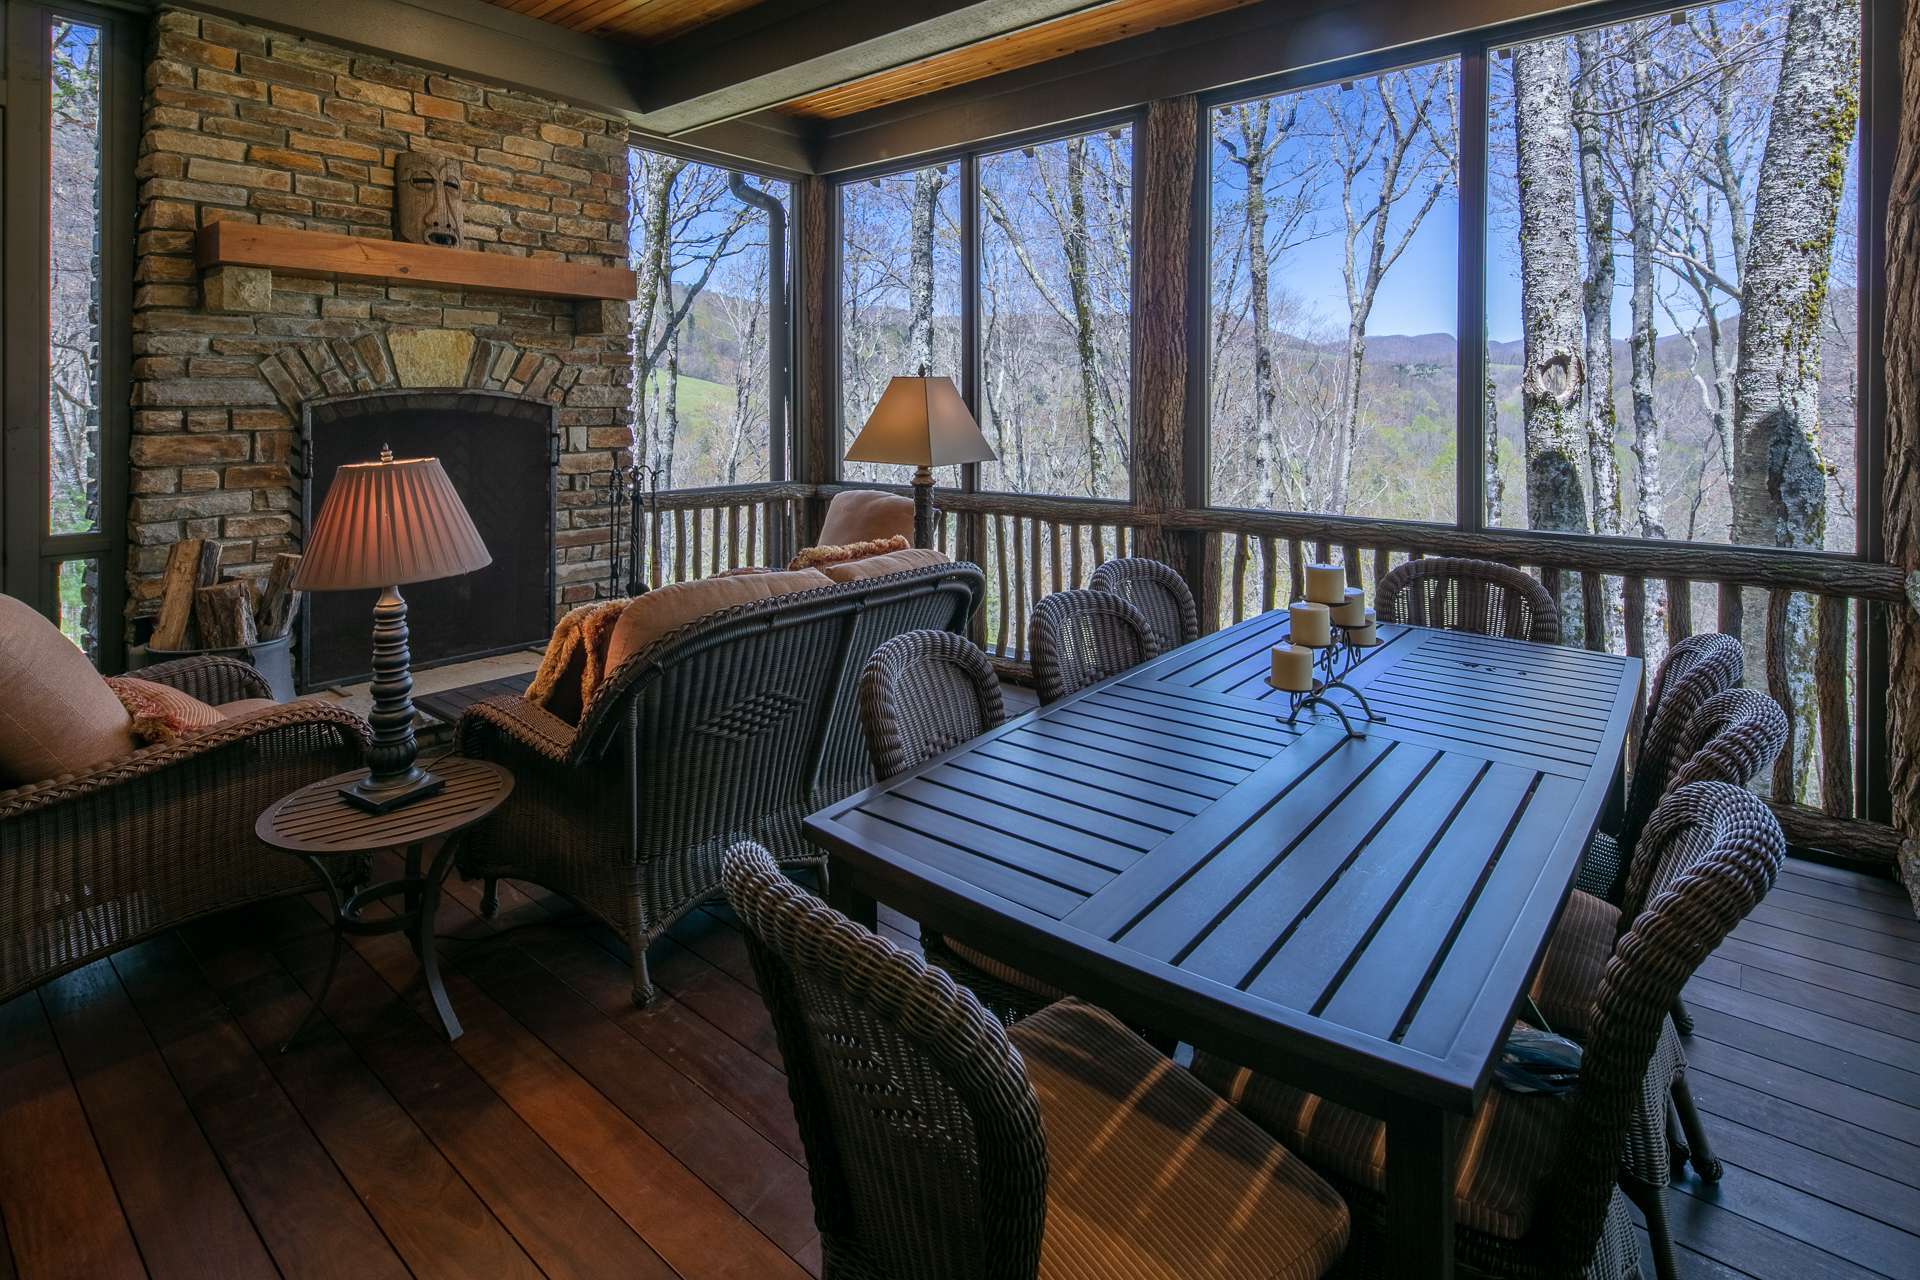 Expanding the living space to the outdoors during warmer months in the mountains, this screened in porch is a peaceful place to enjoy alfresco dining.